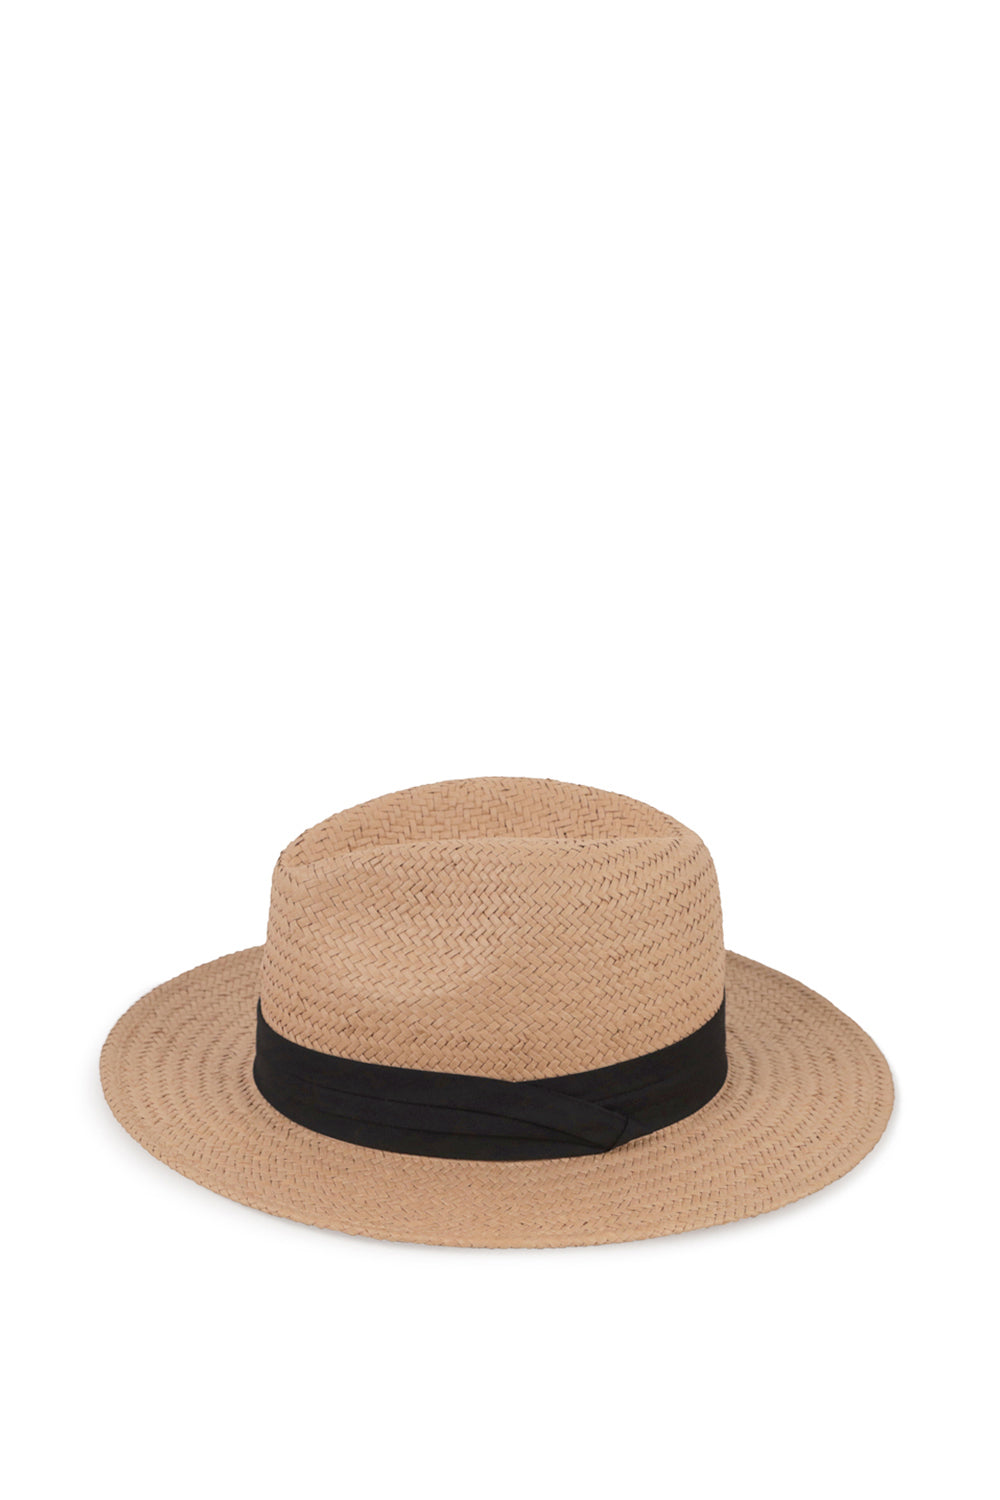 My Accessories London Straw fedora with Grosgrain Trim in Beige and Black | Beach | Holiday | Summer | Occasion | Races | Women's | Women's Accessories | Accessory | Hat | Hats | BBQ